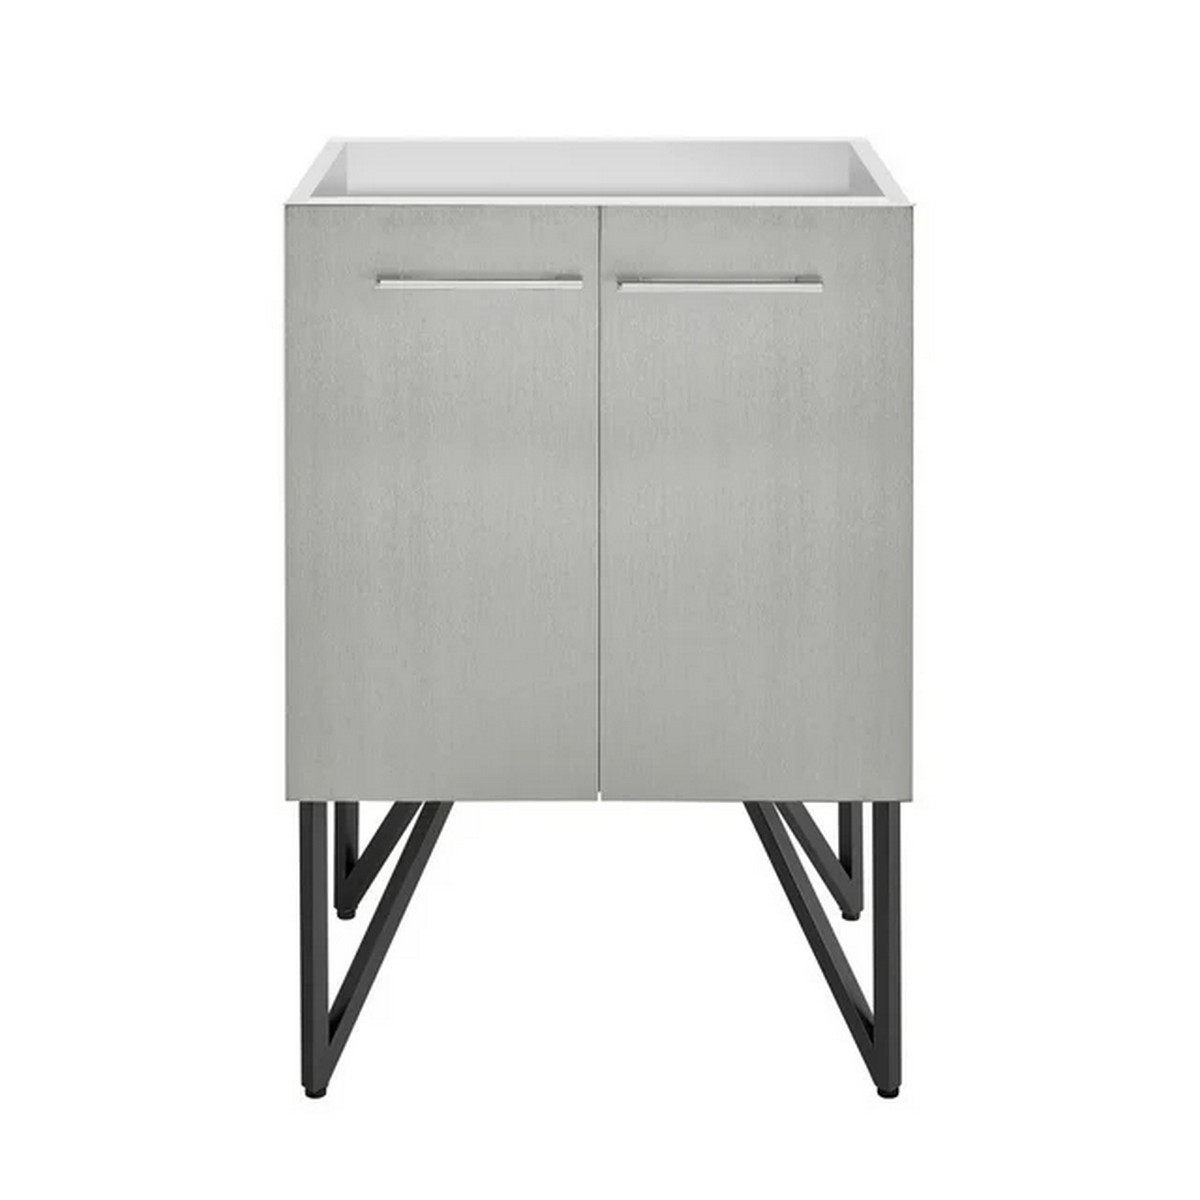 SWISS MADISON SM-BV232-C ANNECY 24 INCH FREESTANDING SINGLE SINK BATHROOM VANITY CABINET ONLY IN BRUSHED GREY